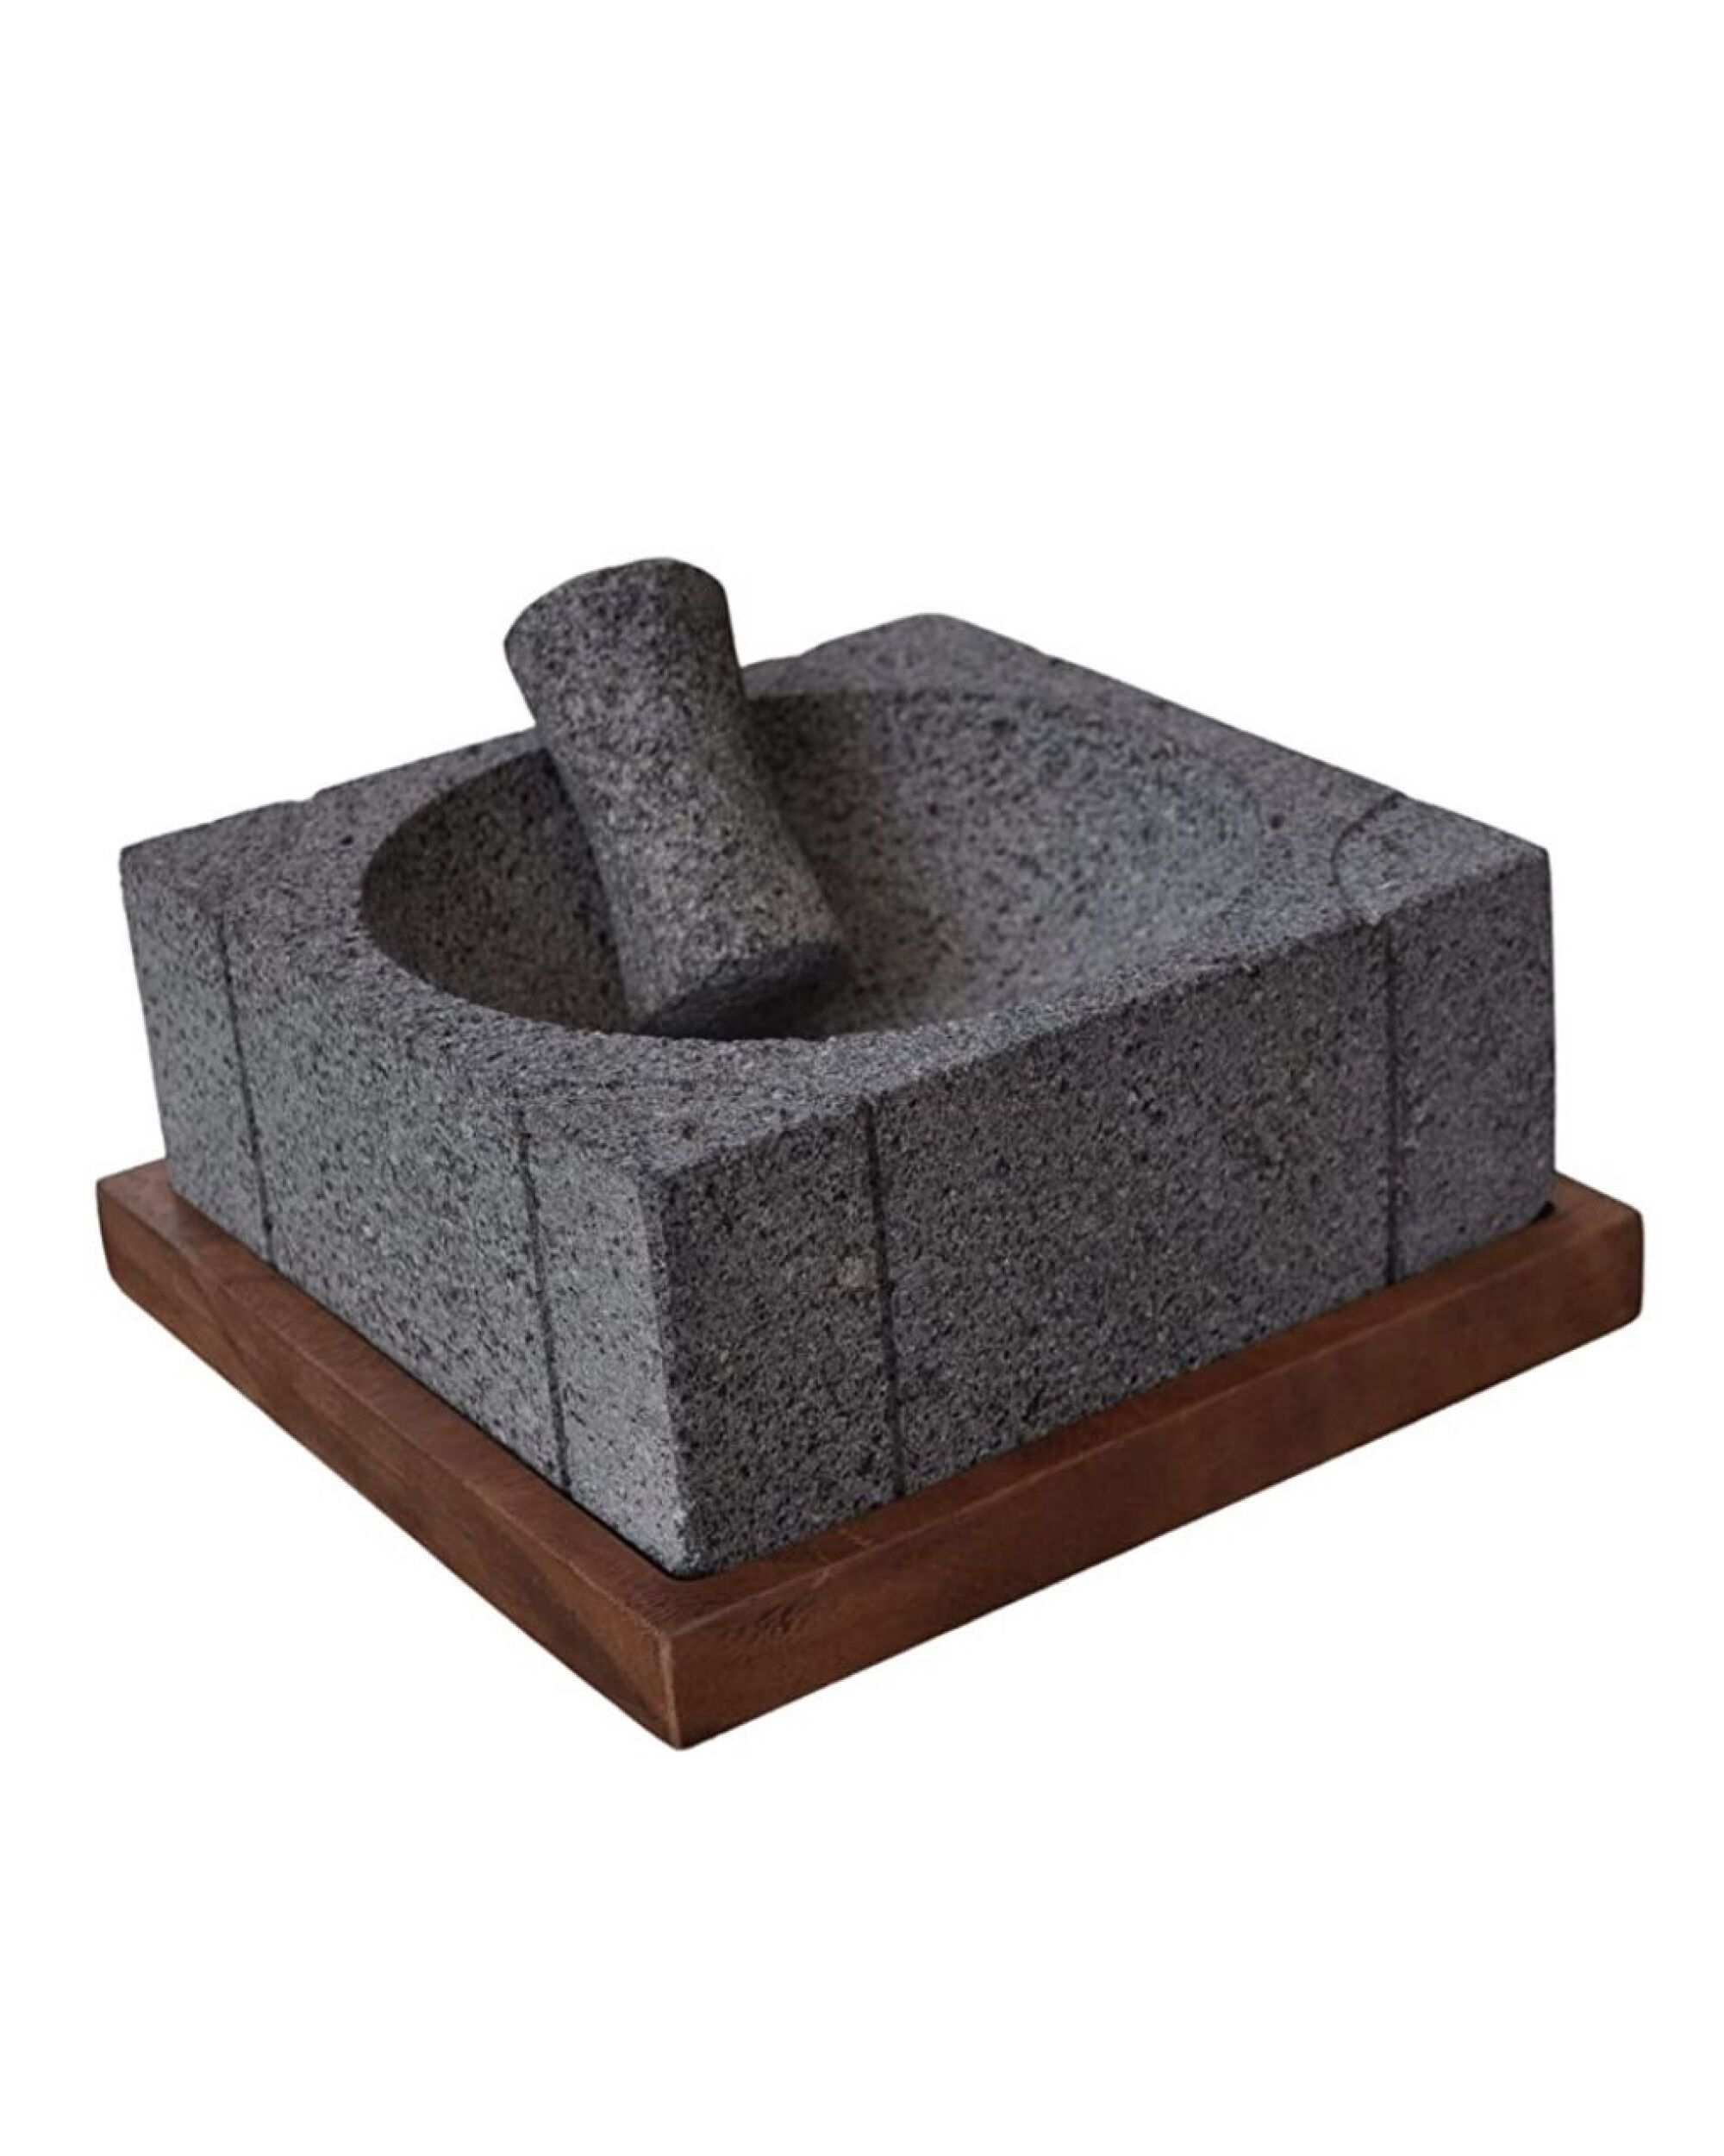 The molcajete nahum volcanic stone parota with a wood base from Cemcui 